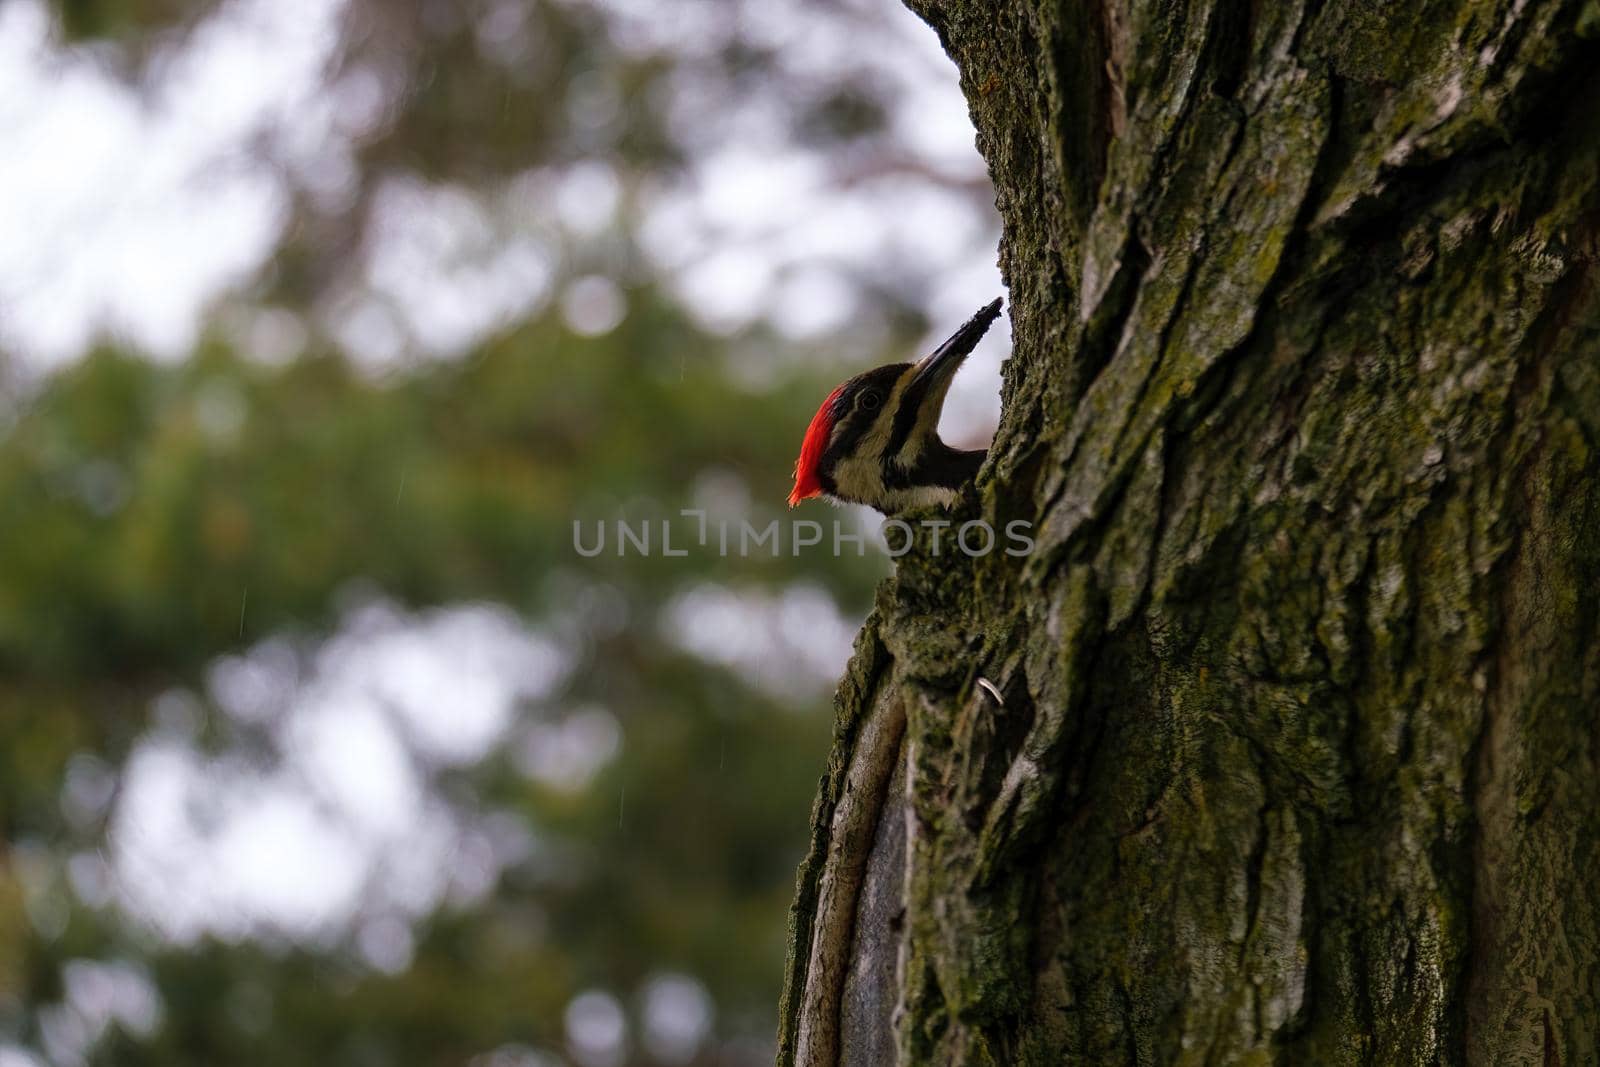 Pileated woodpecker peeking out on side of a tree by colintemple